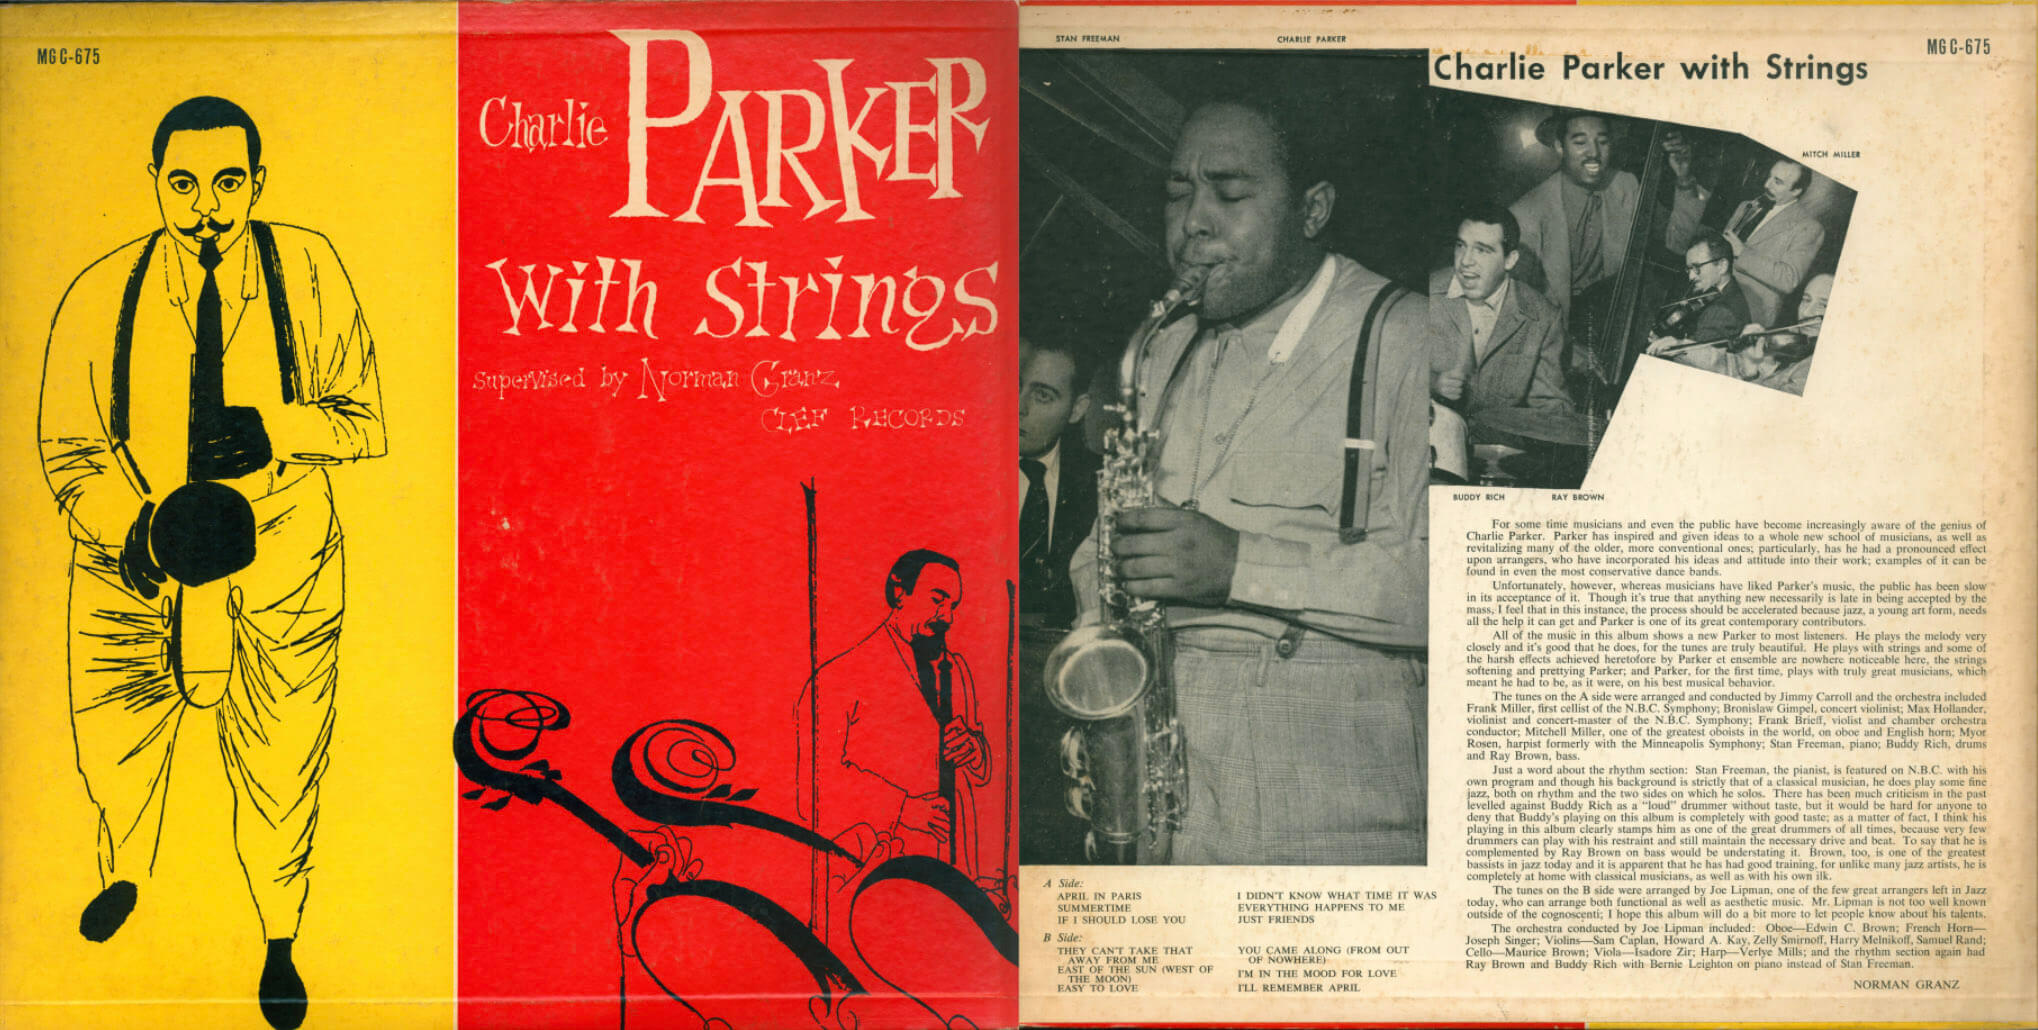 Charlie Parker with Strings album art